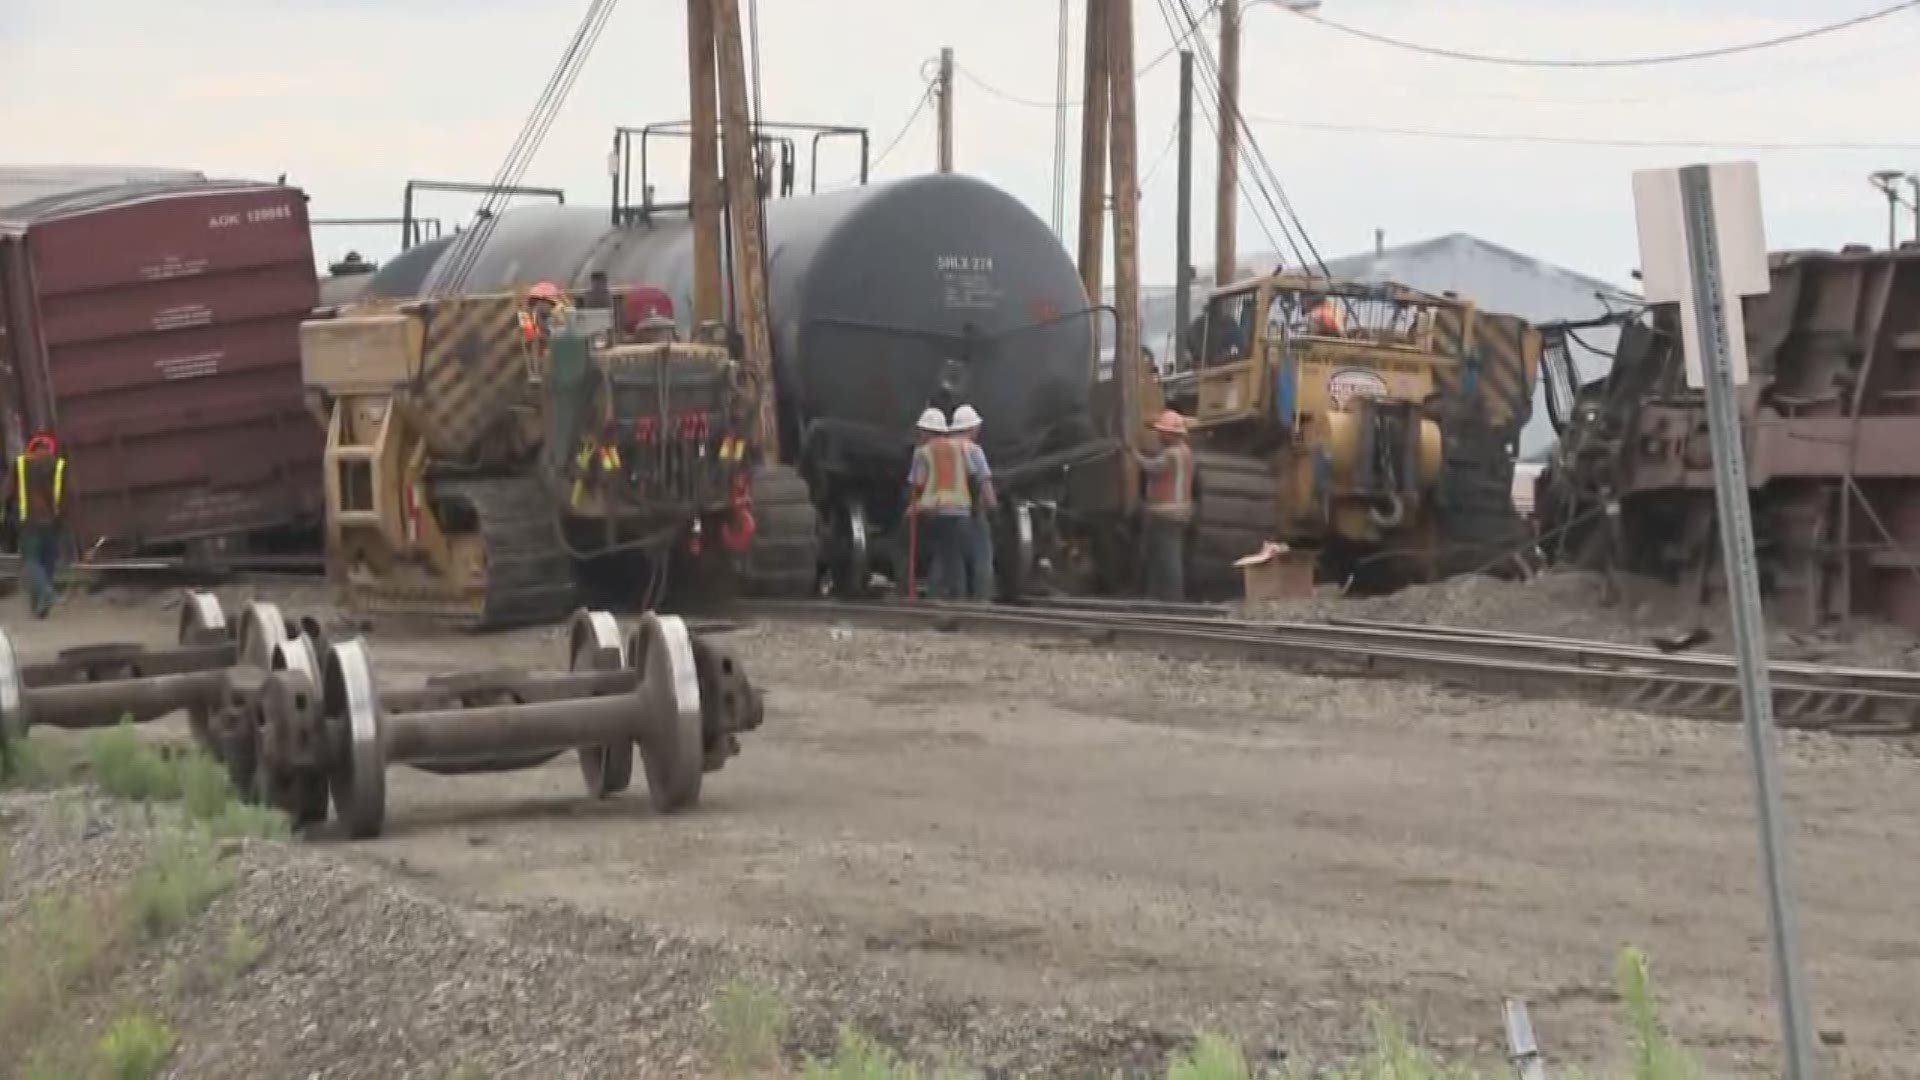 No one was injured and the main line was not affected, according to a Union Pacific spokesperson.